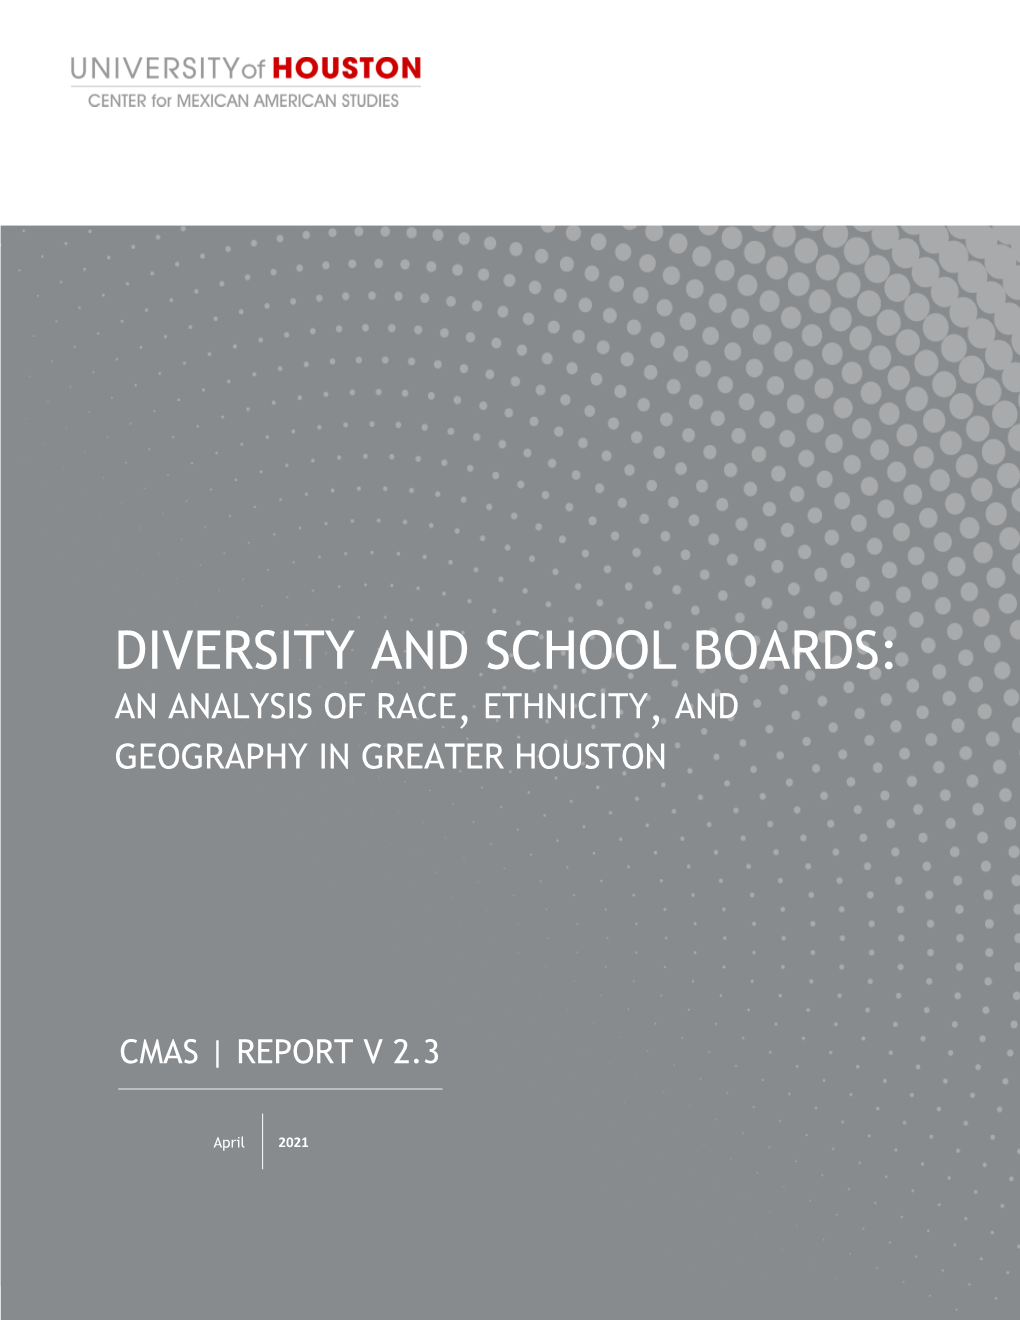 Diversity and School Boards: an Analysis of Race, Ethnicity, and Geography in Greater Houston